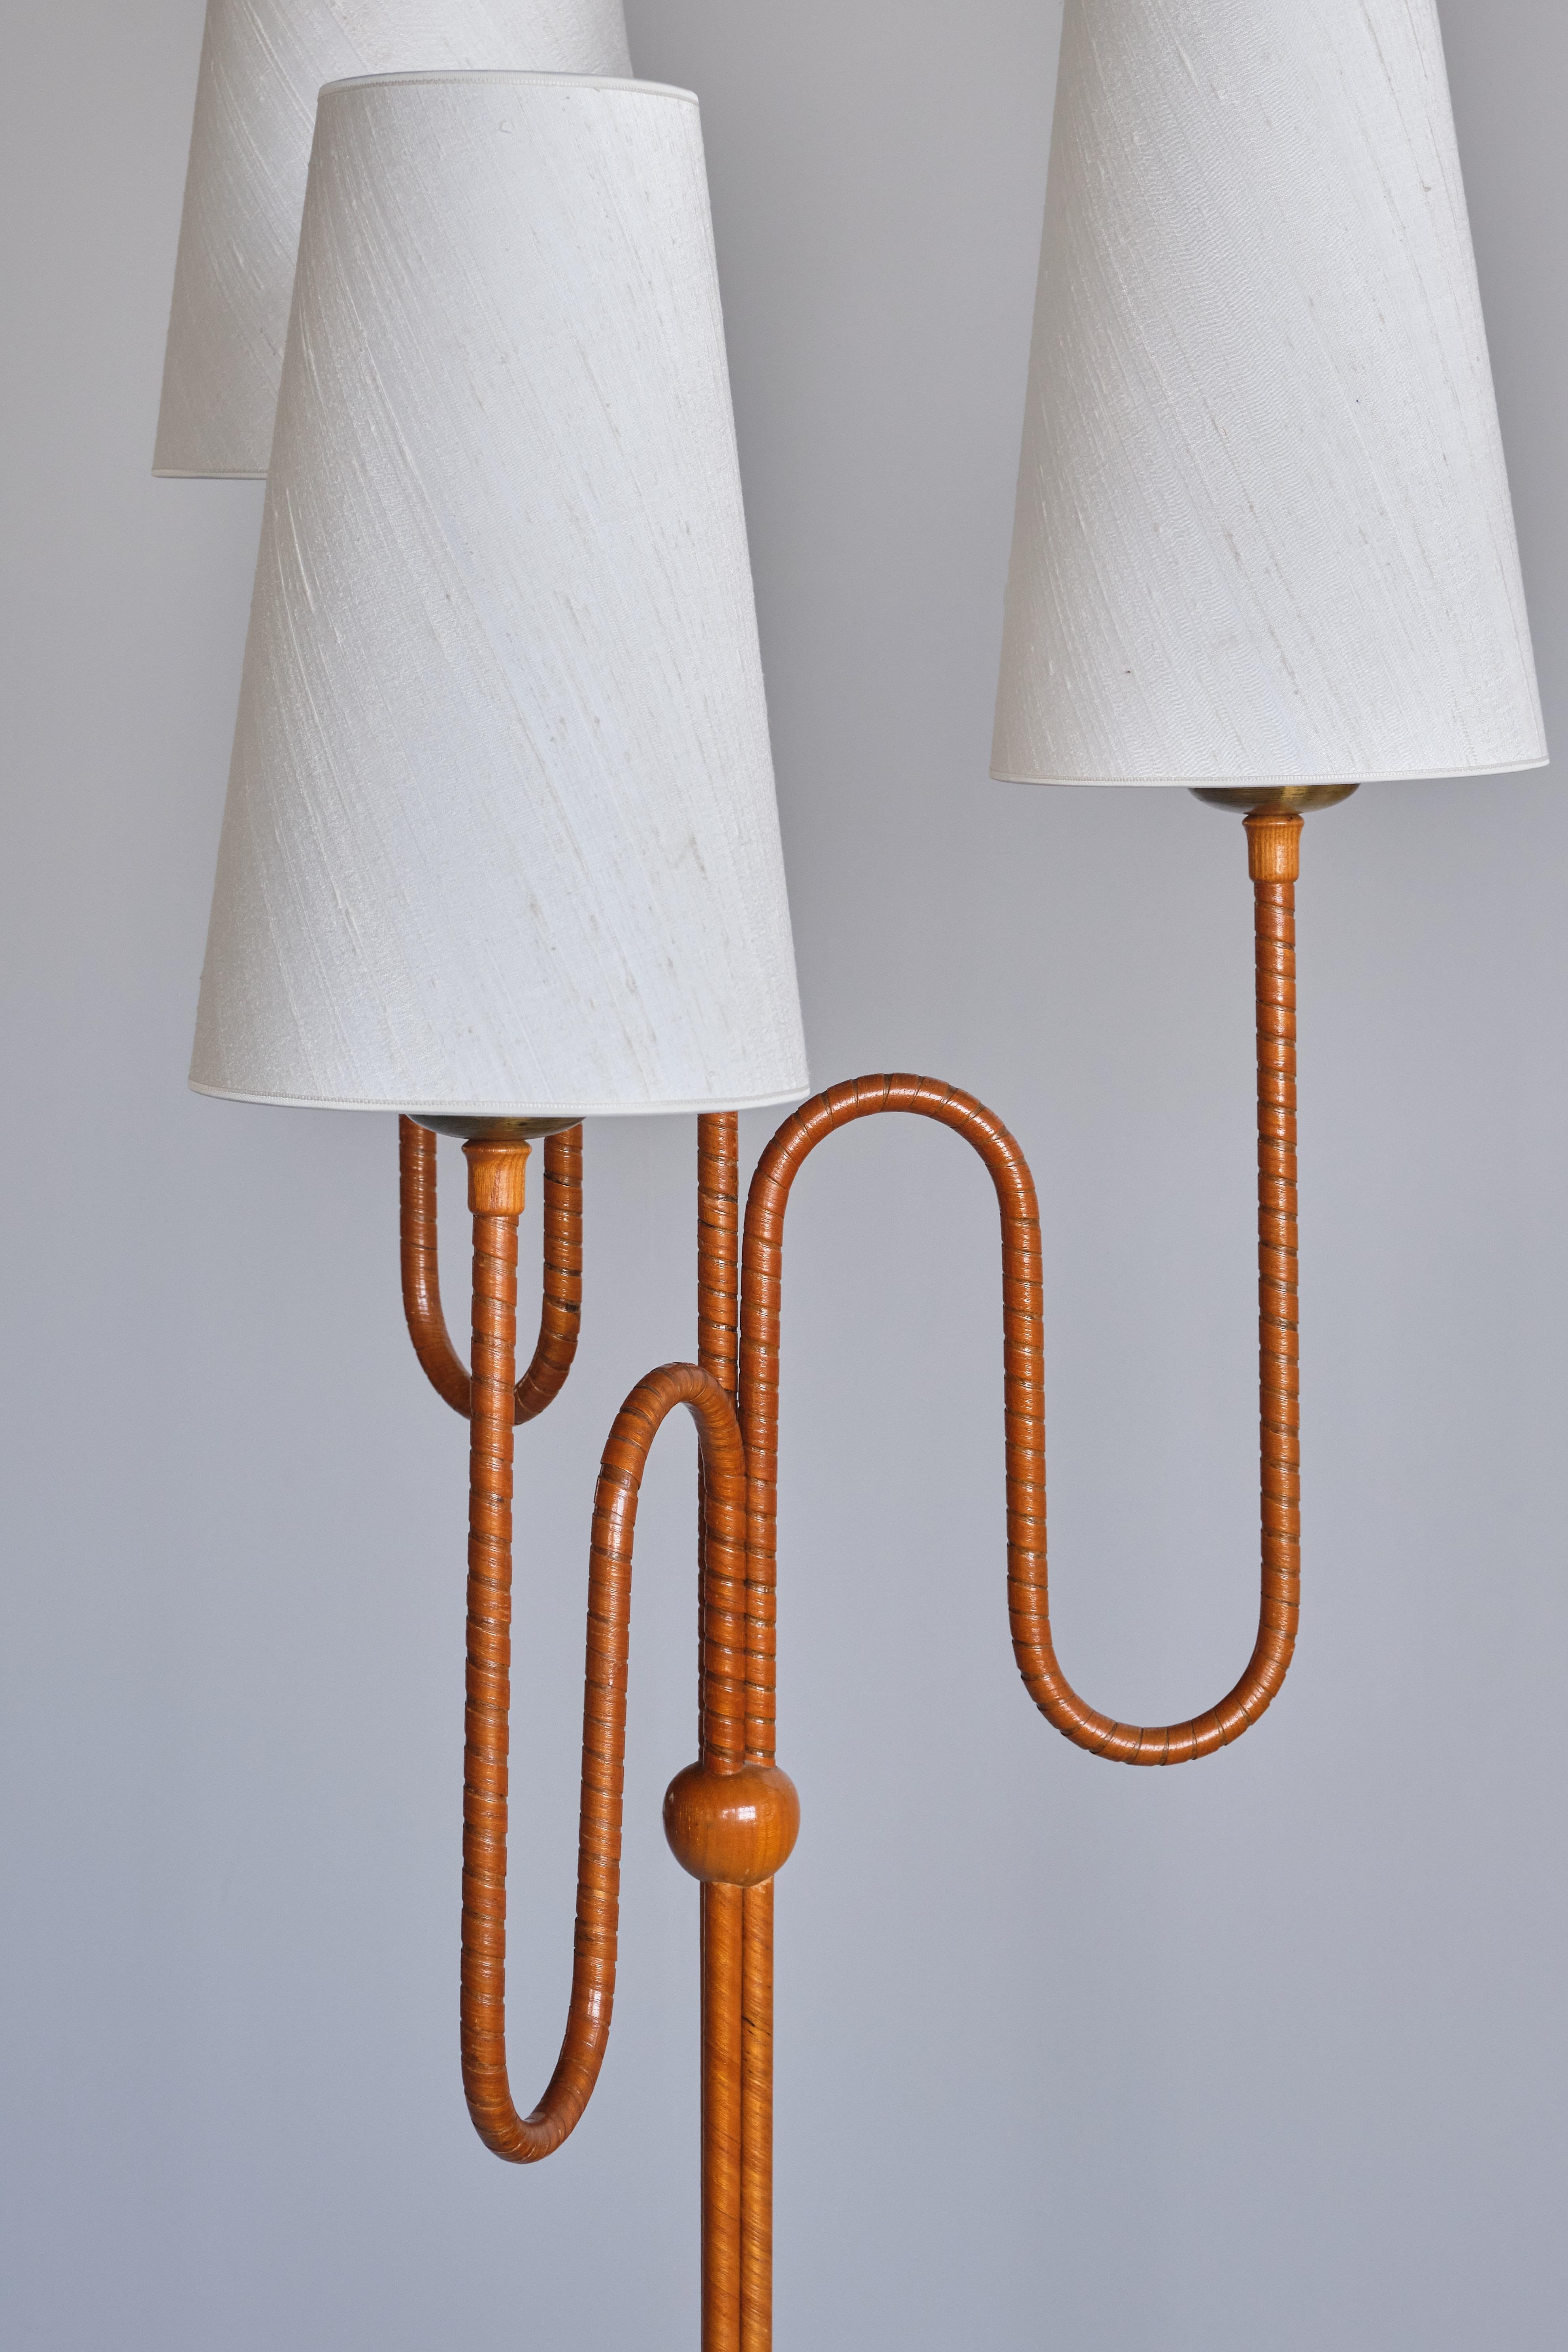 Sculptural Swedish Modern Three Arm Floor Lamp in Elm and Silk,  1930s For Sale 5